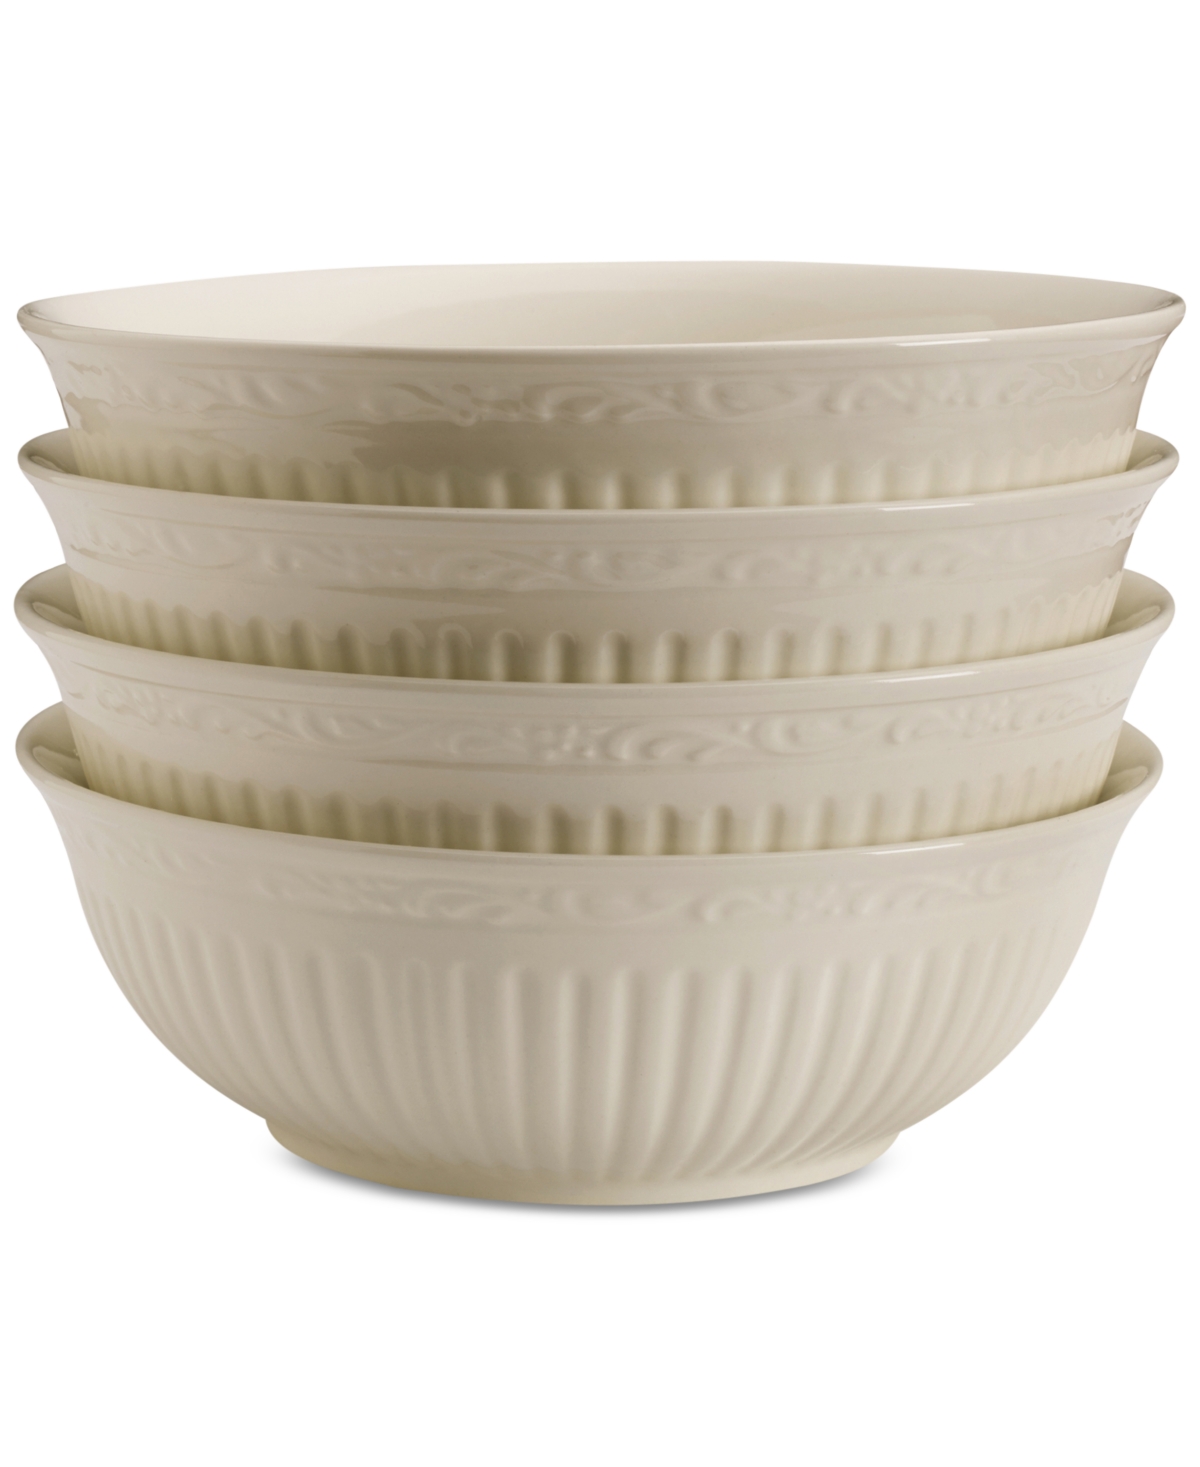 Dinnerware, Set of 4 Italian Countryside Cereal Bowls